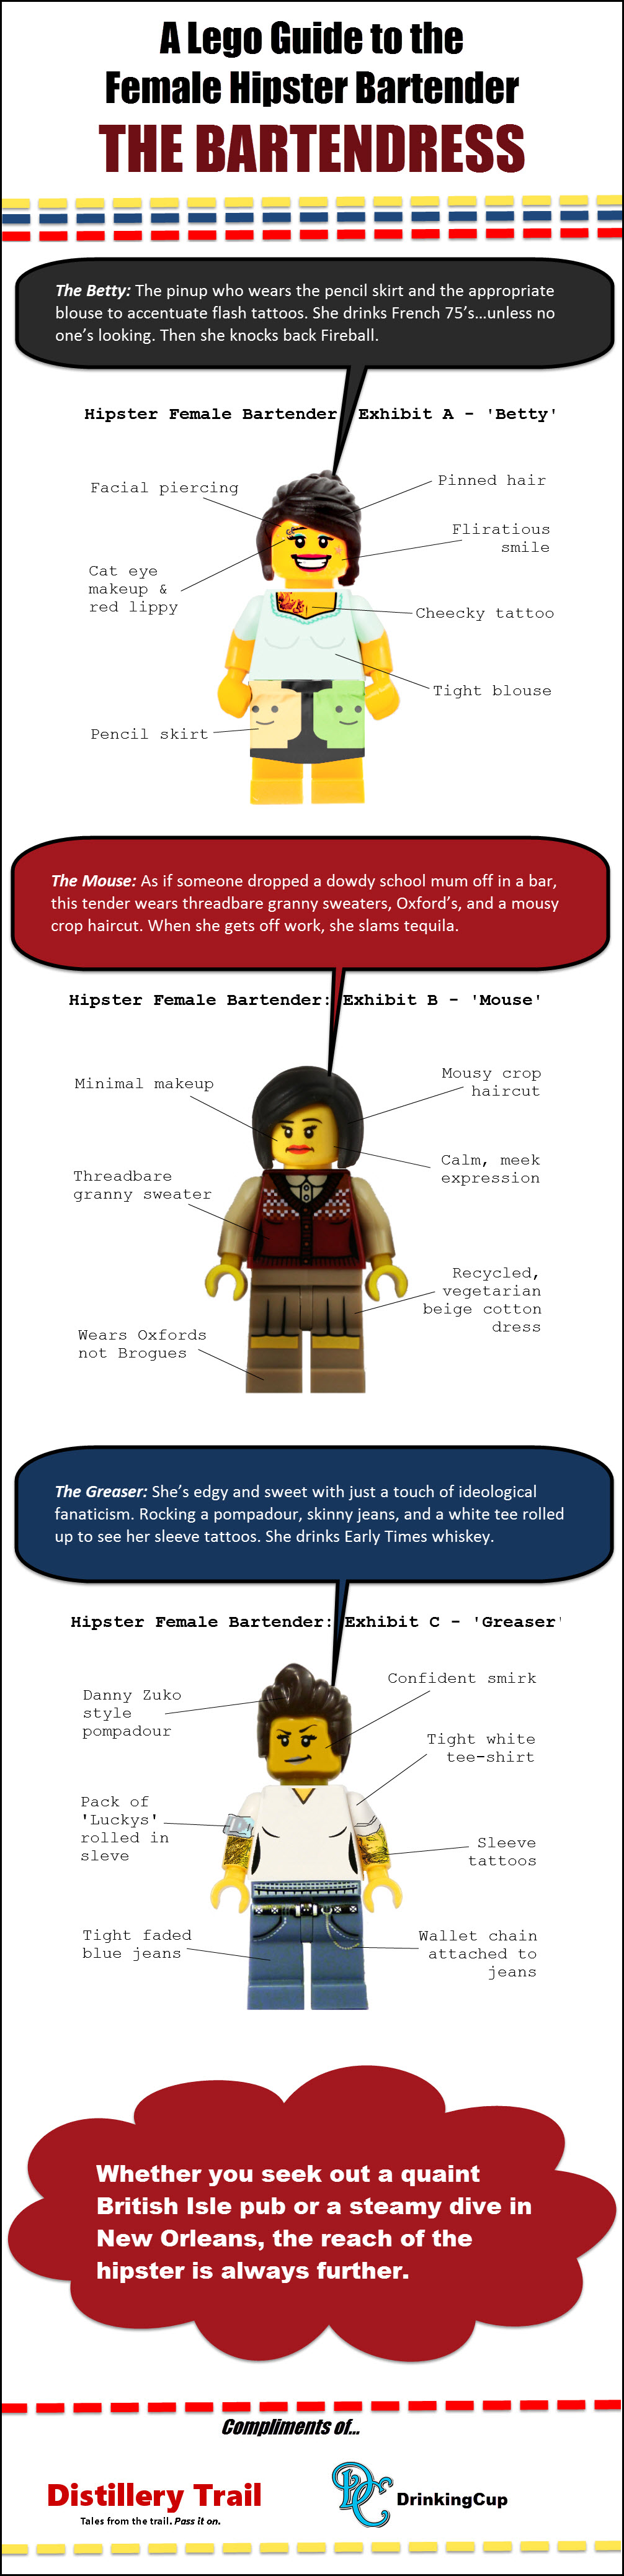 The Female Hipster Bartender Infographic Lego Style